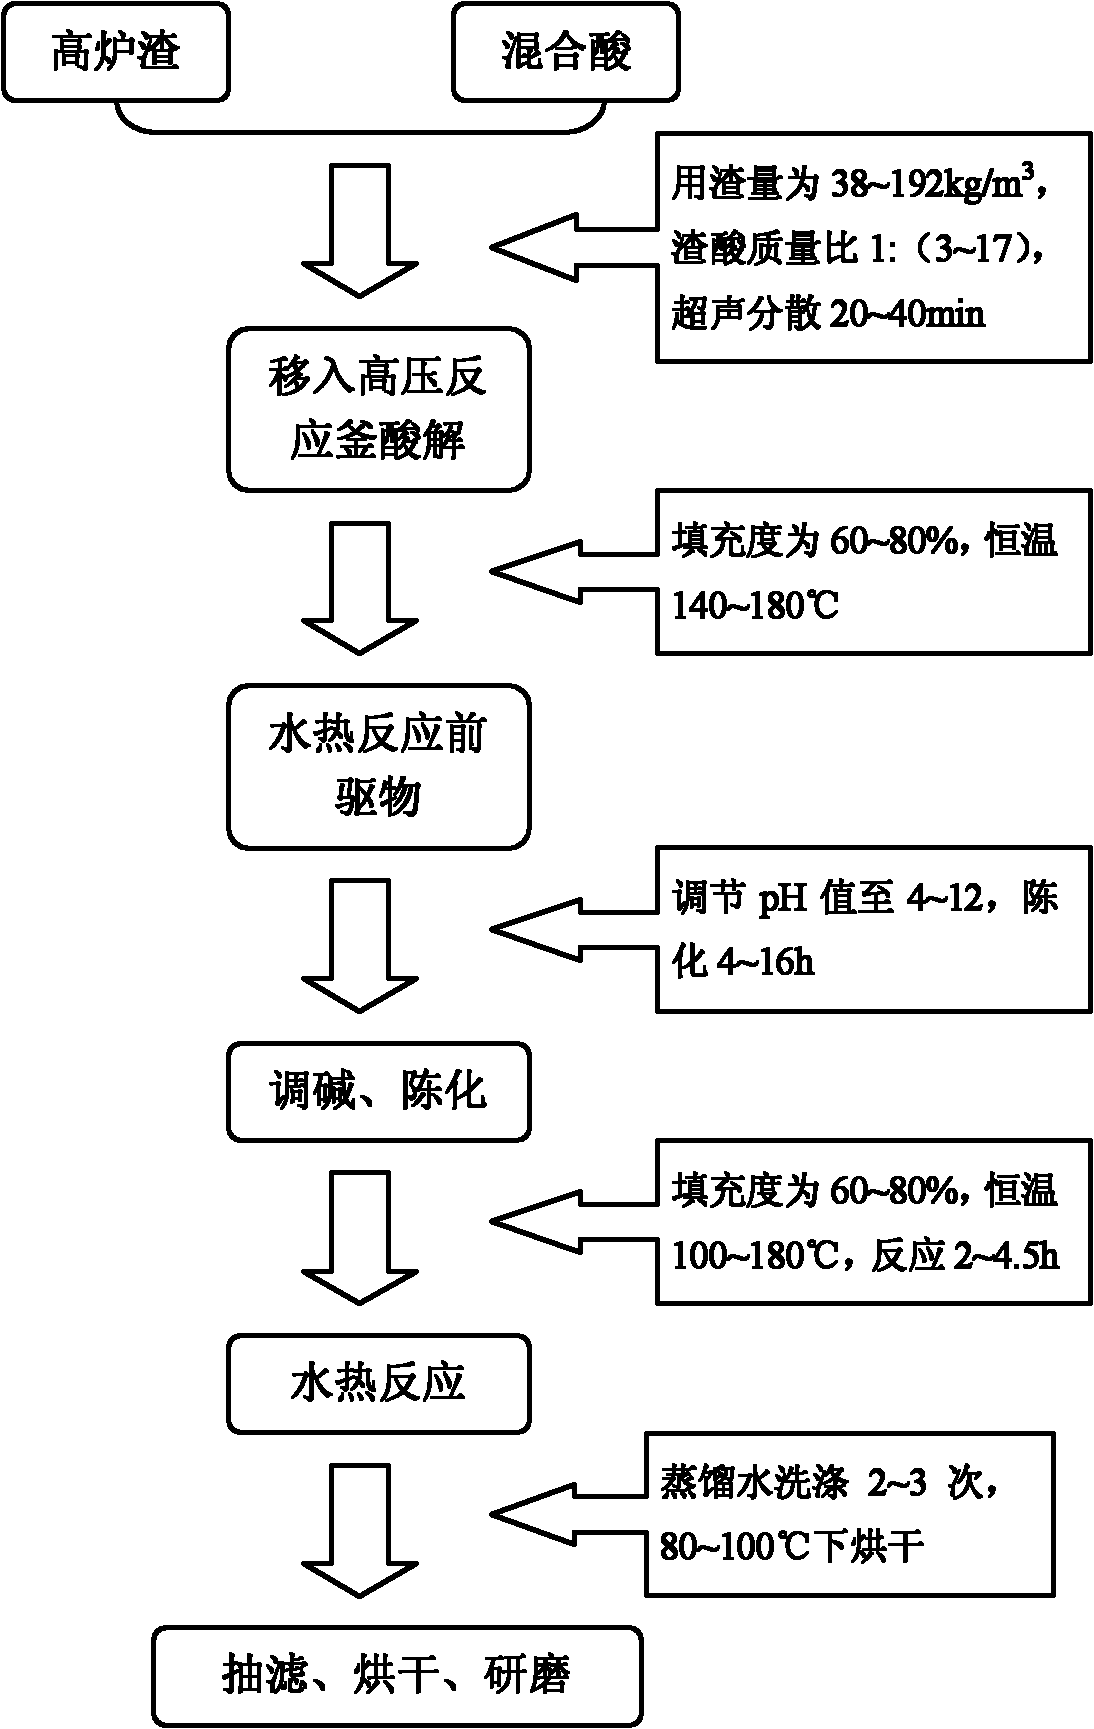 Preparation process for preparing photocatalyst from blast furnace slag serving as raw material